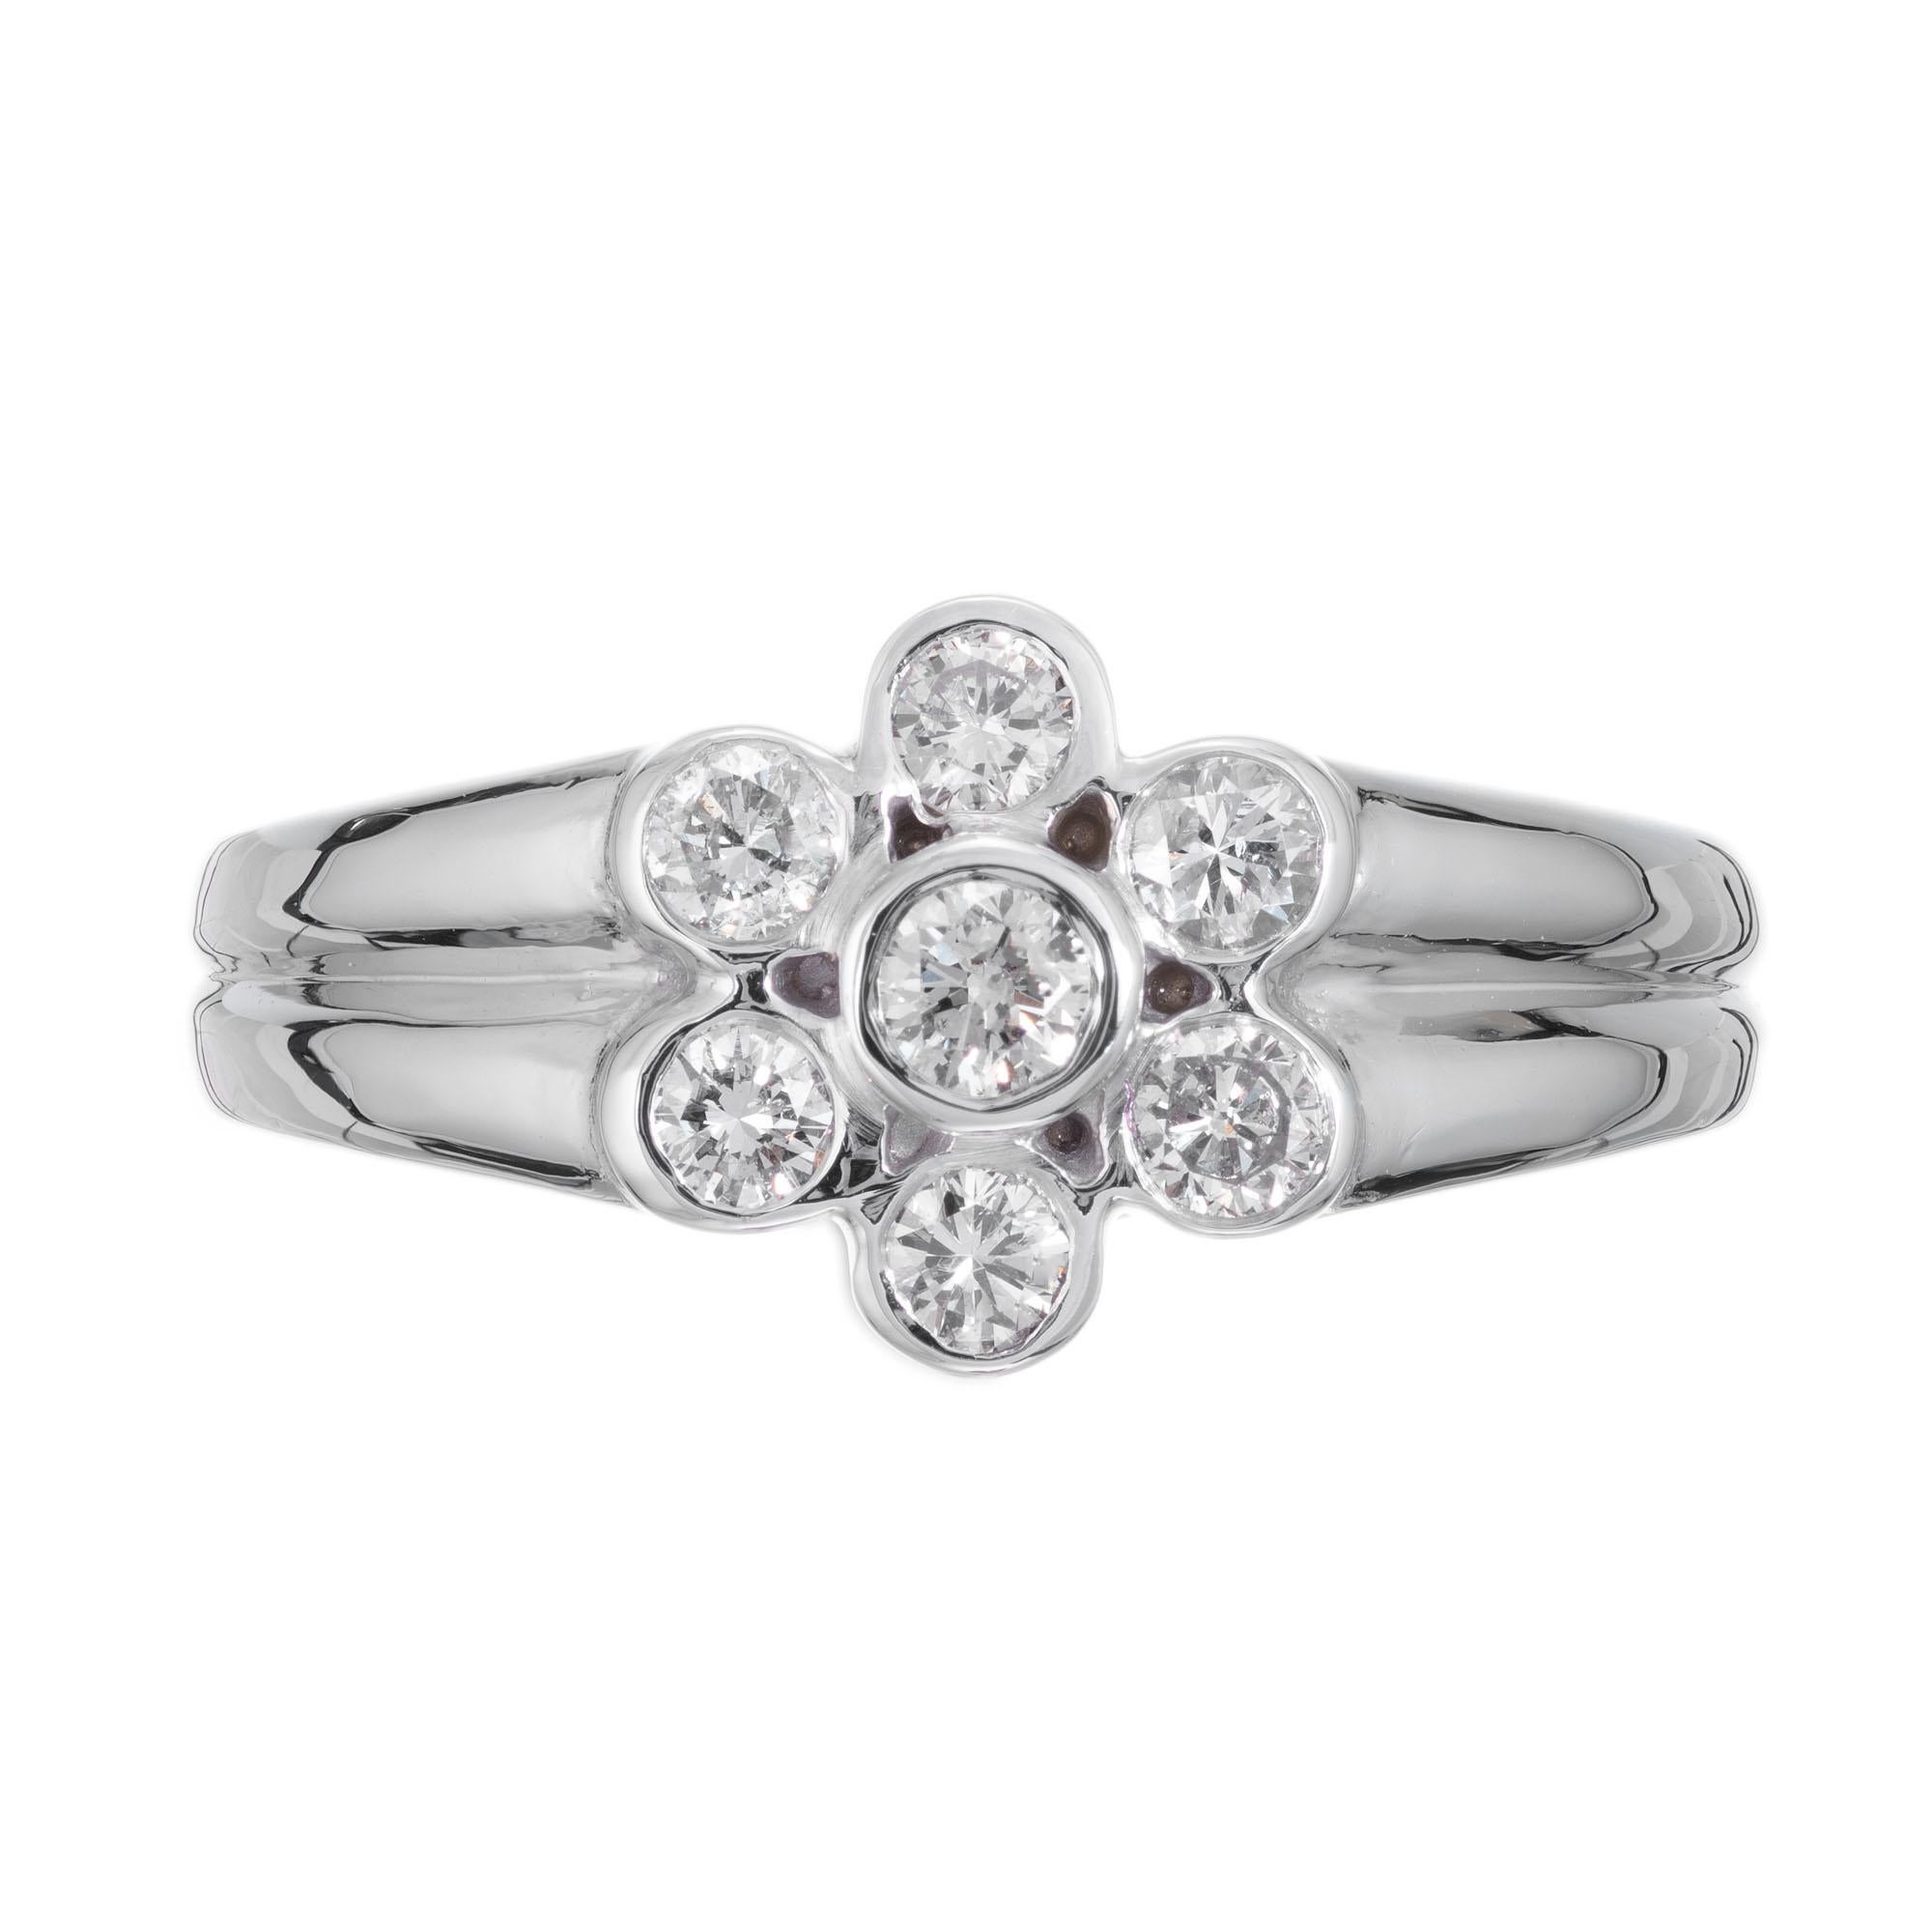 7 round diamond flower design ring. 14 white gold setting with .43ct diamonds. 

7 round brillaint cut diamonds. approx. total weight:.43ct J-K, VS-SI
Size: 6.75 and sizable
wide at top: 10.2
high at top: 4.9mm
wide at bottom: 3.3mm
tested: 14k